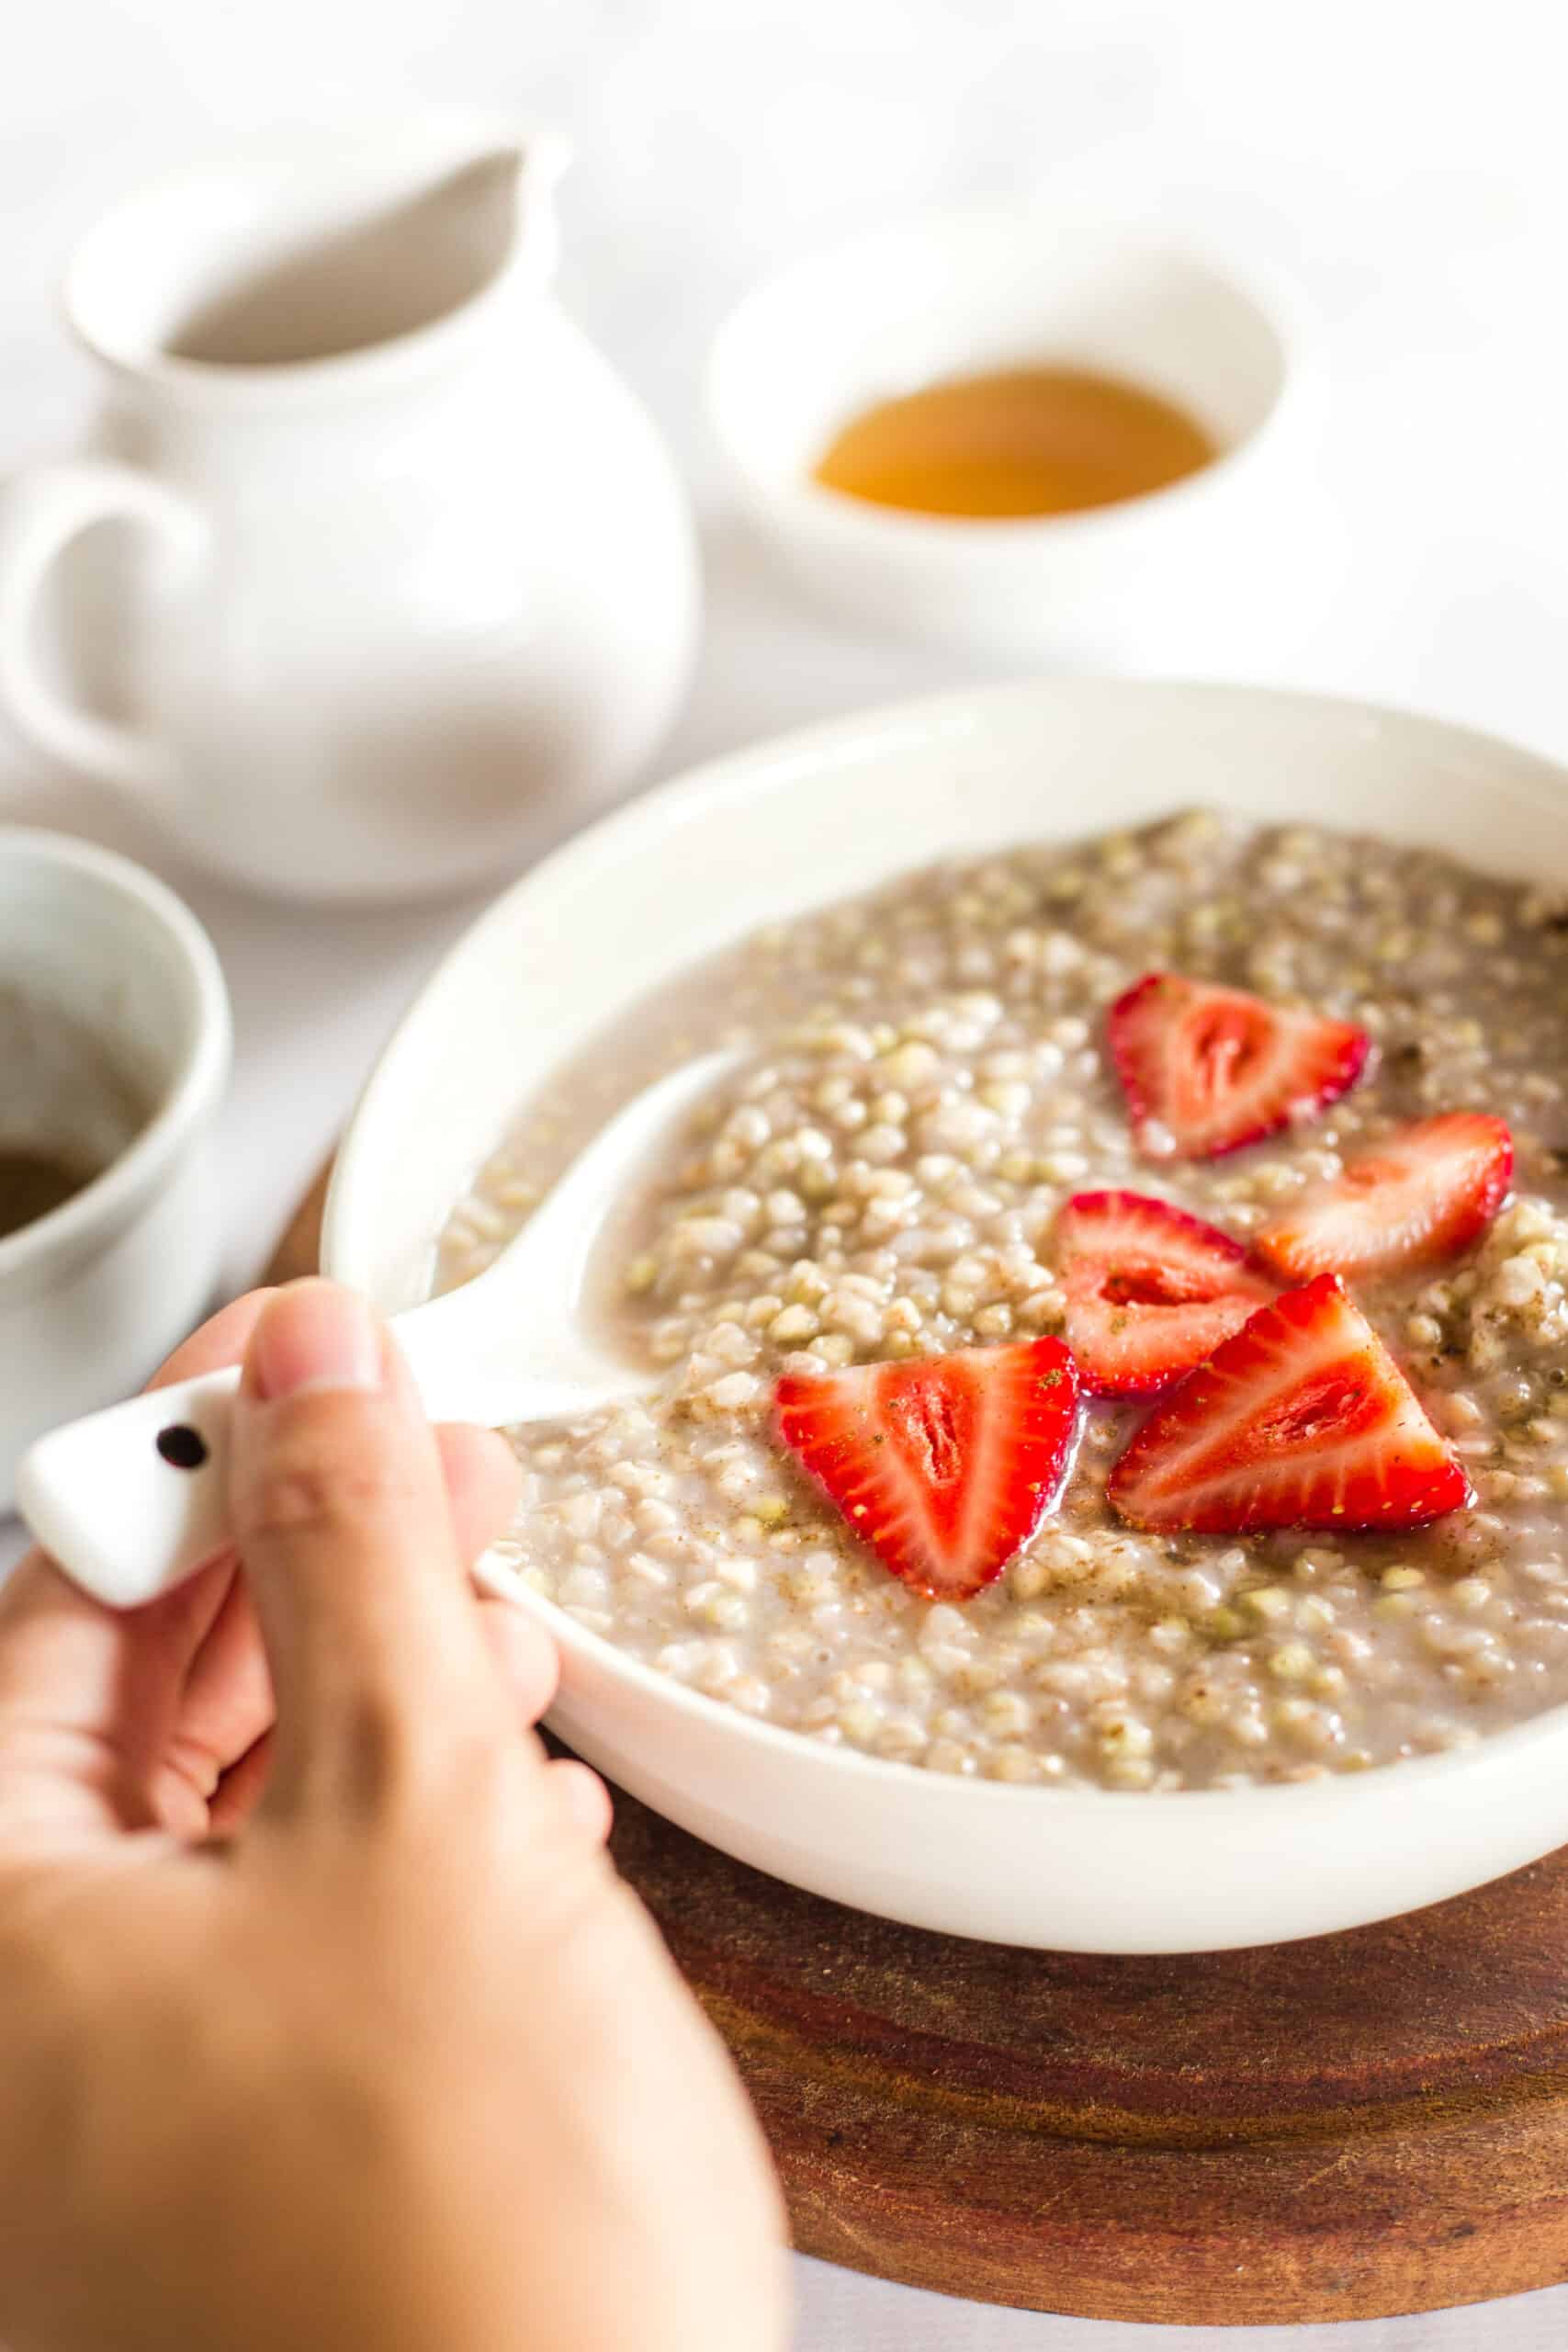 Reaching for a spoonful of buckwheat porridge and strawberries.